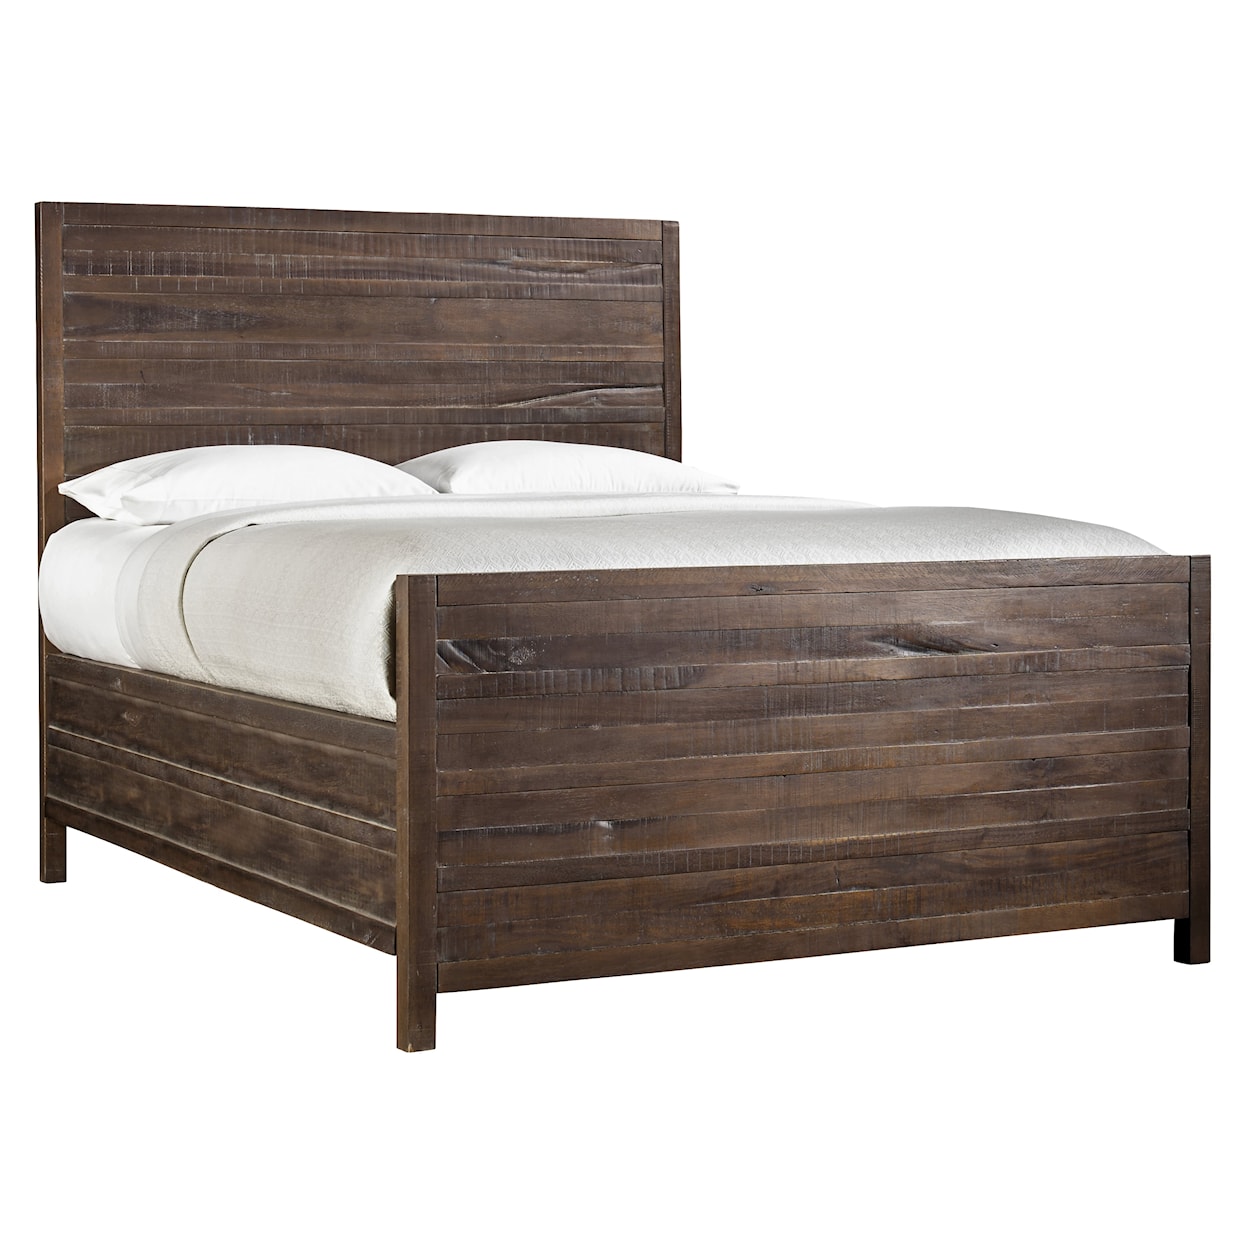 Modus International Townsend Queen Low-Profile Bed